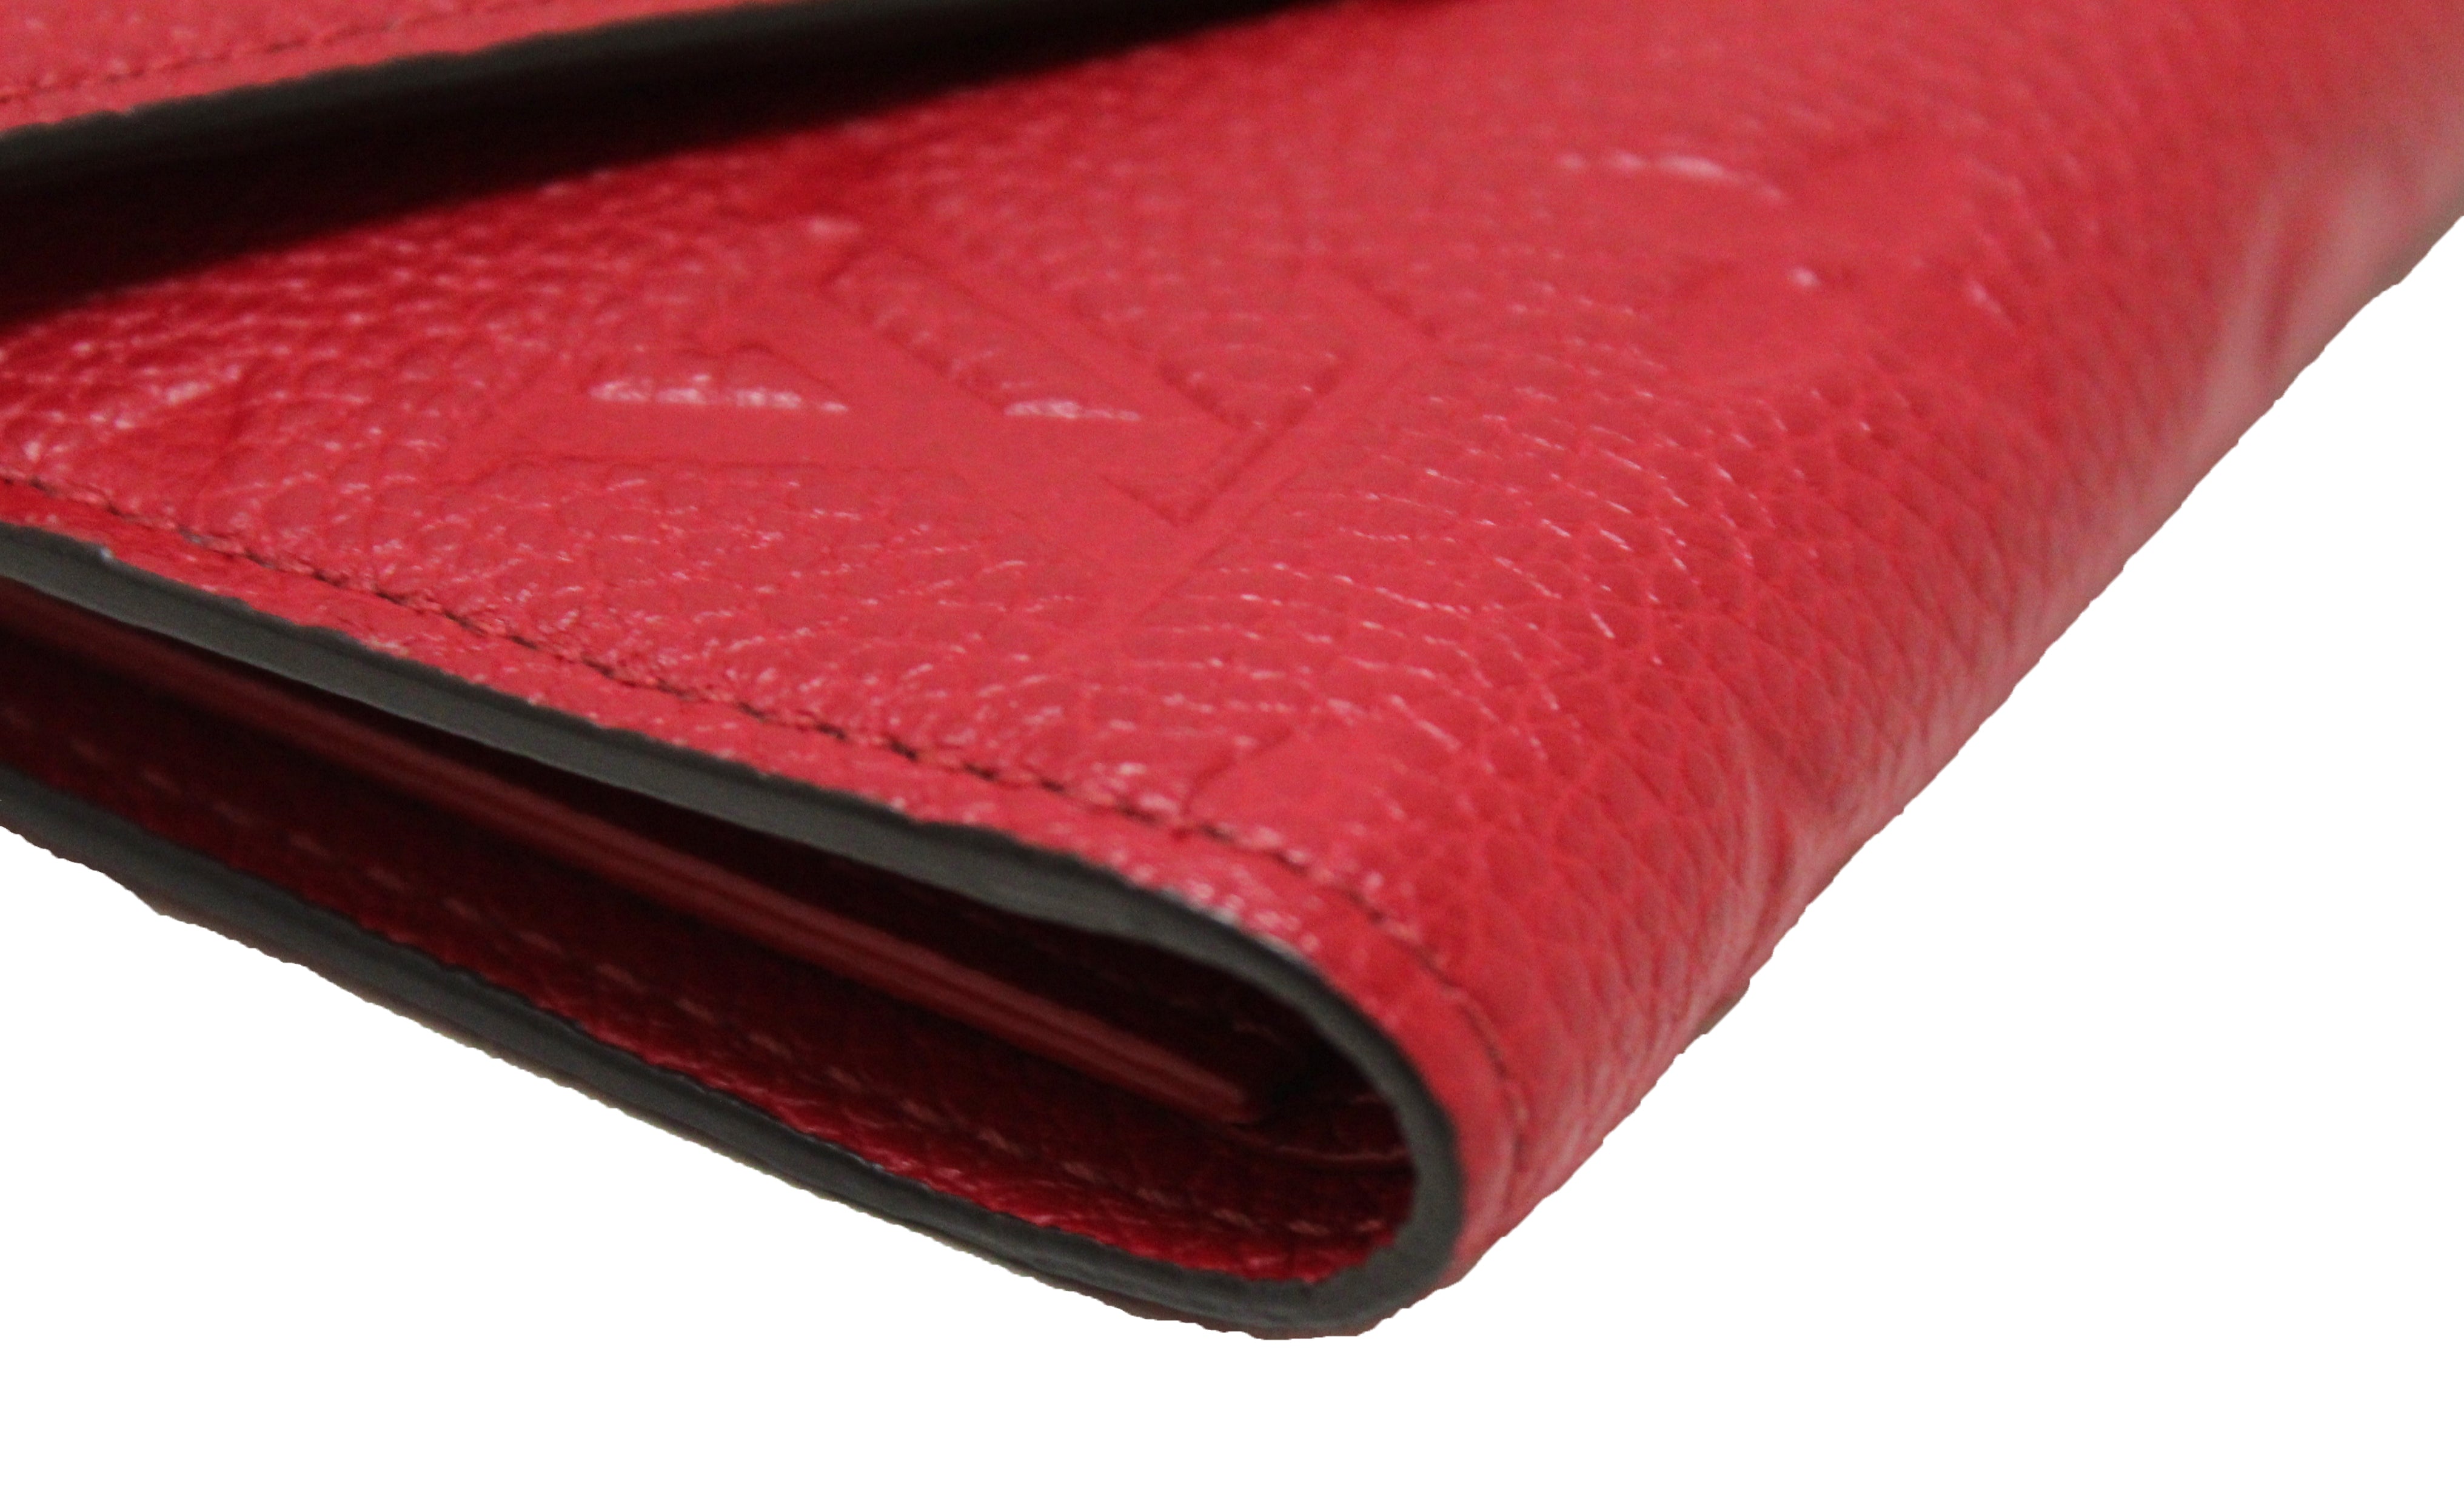 Victorine Wallet Monogram Empreinte - Wallets and Small Leather Goods